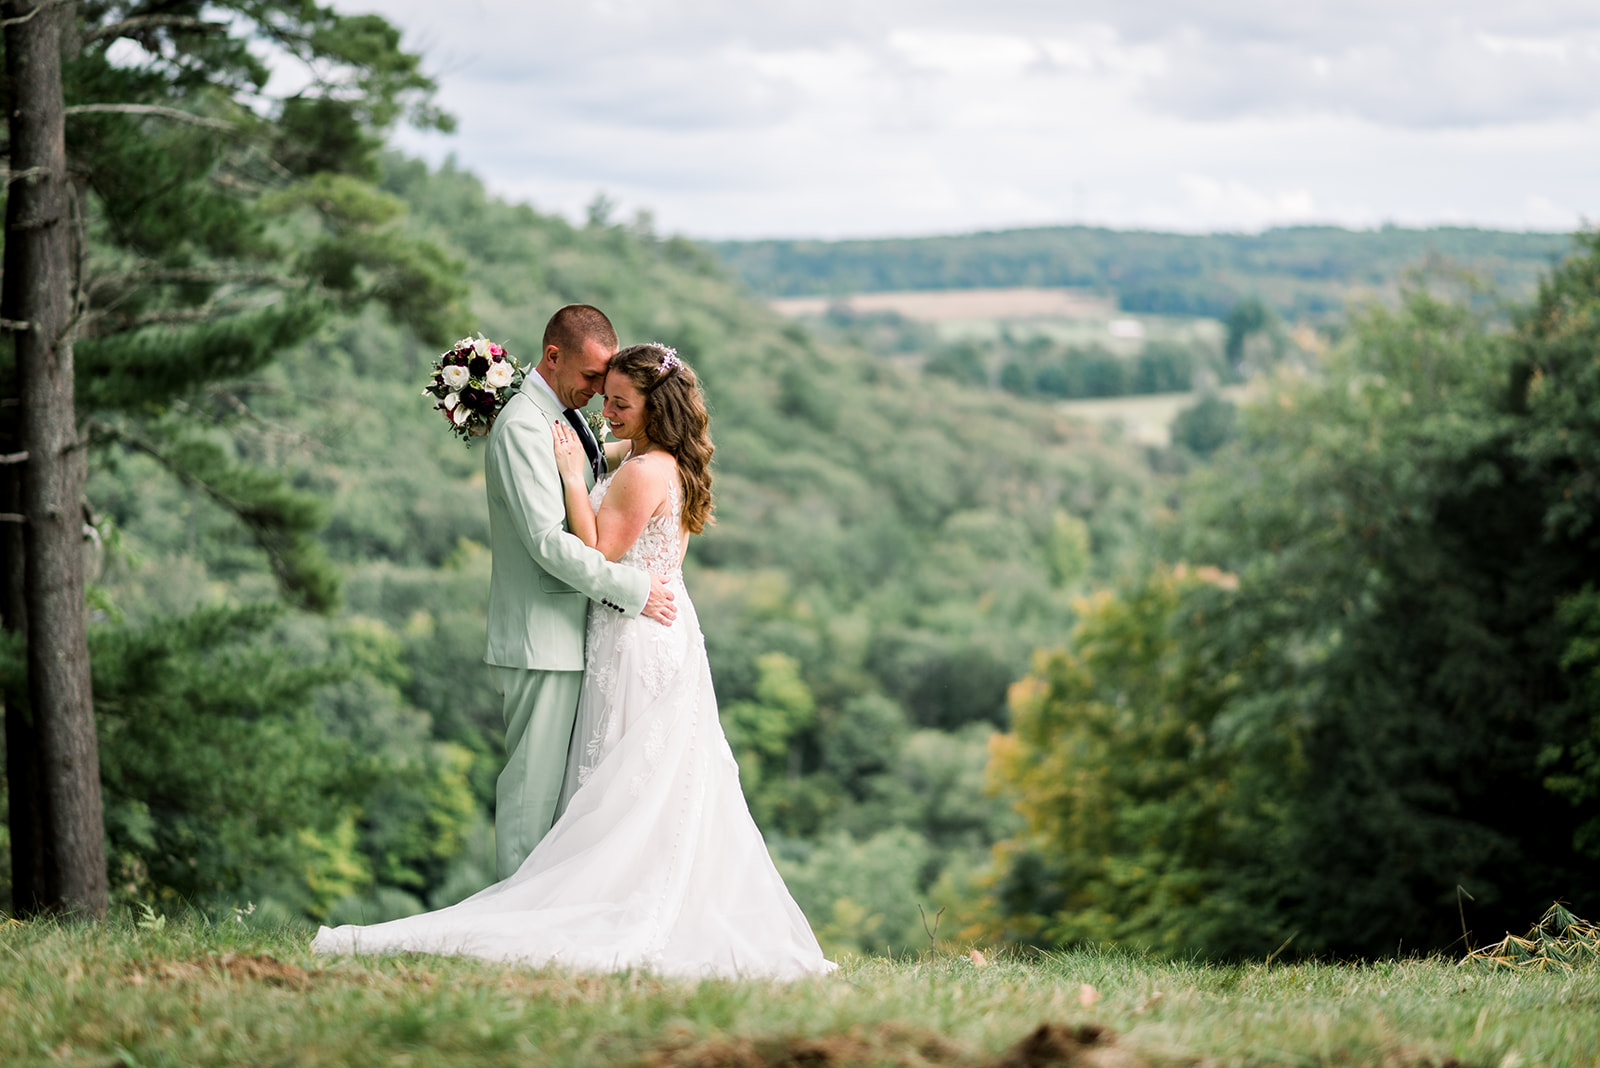 A beautiful wedding on top of Bull Moose Trail at Lost Valley Ski Resort in Auburn, ME.

Molly Breton & Co.